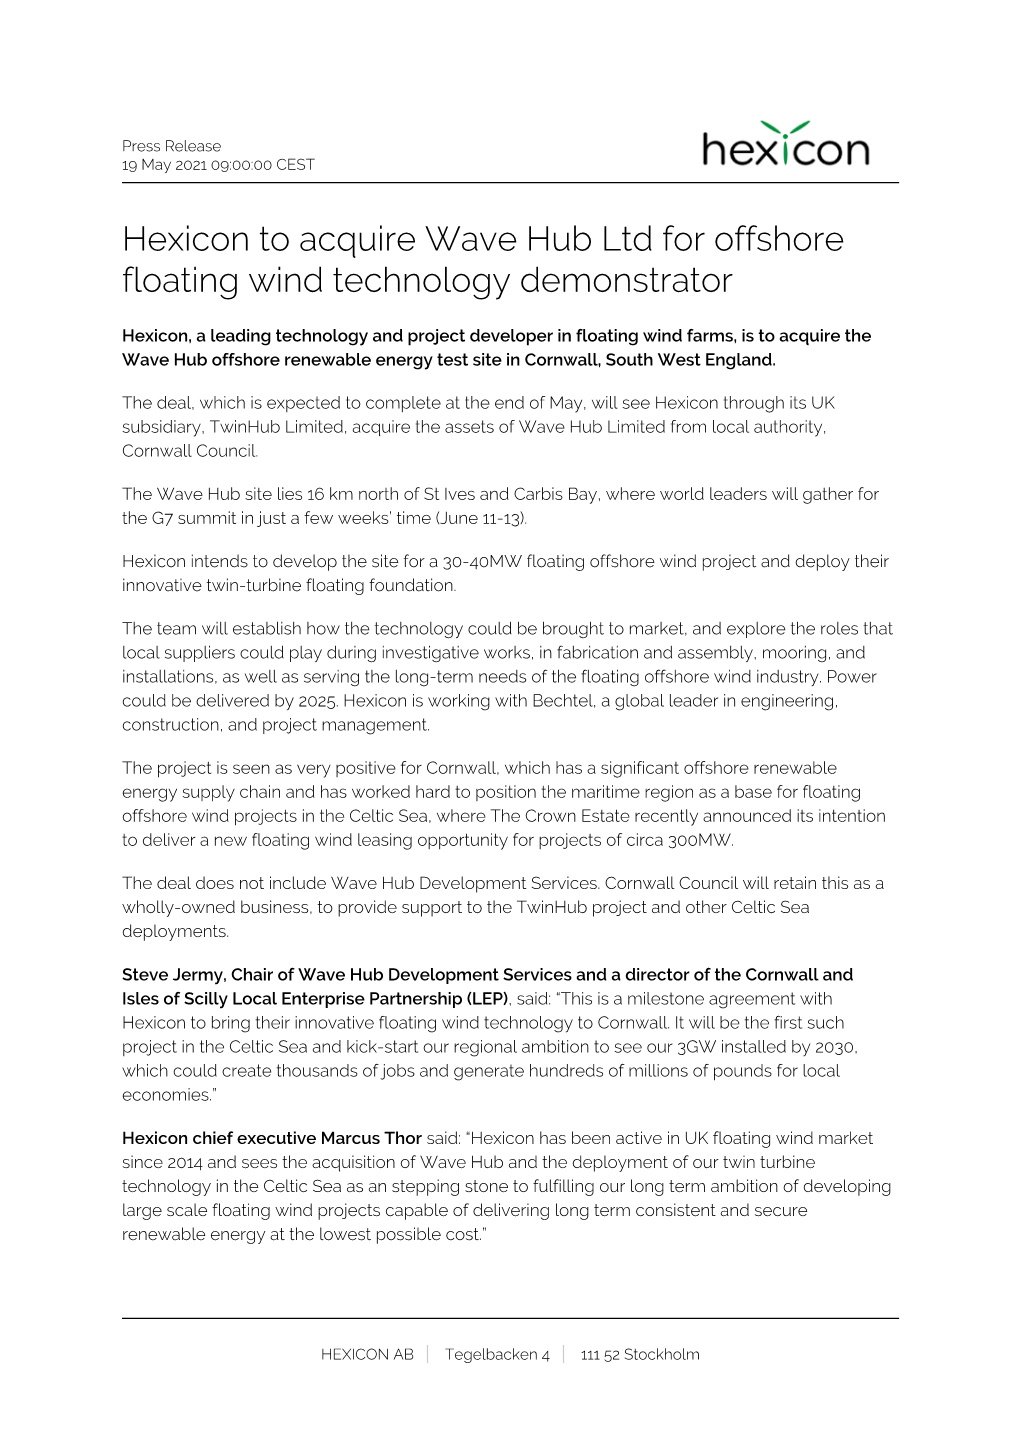 Hexicon to Acquire Wave Hub Ltd for Offshore Floating Wind Technology Demonstrator